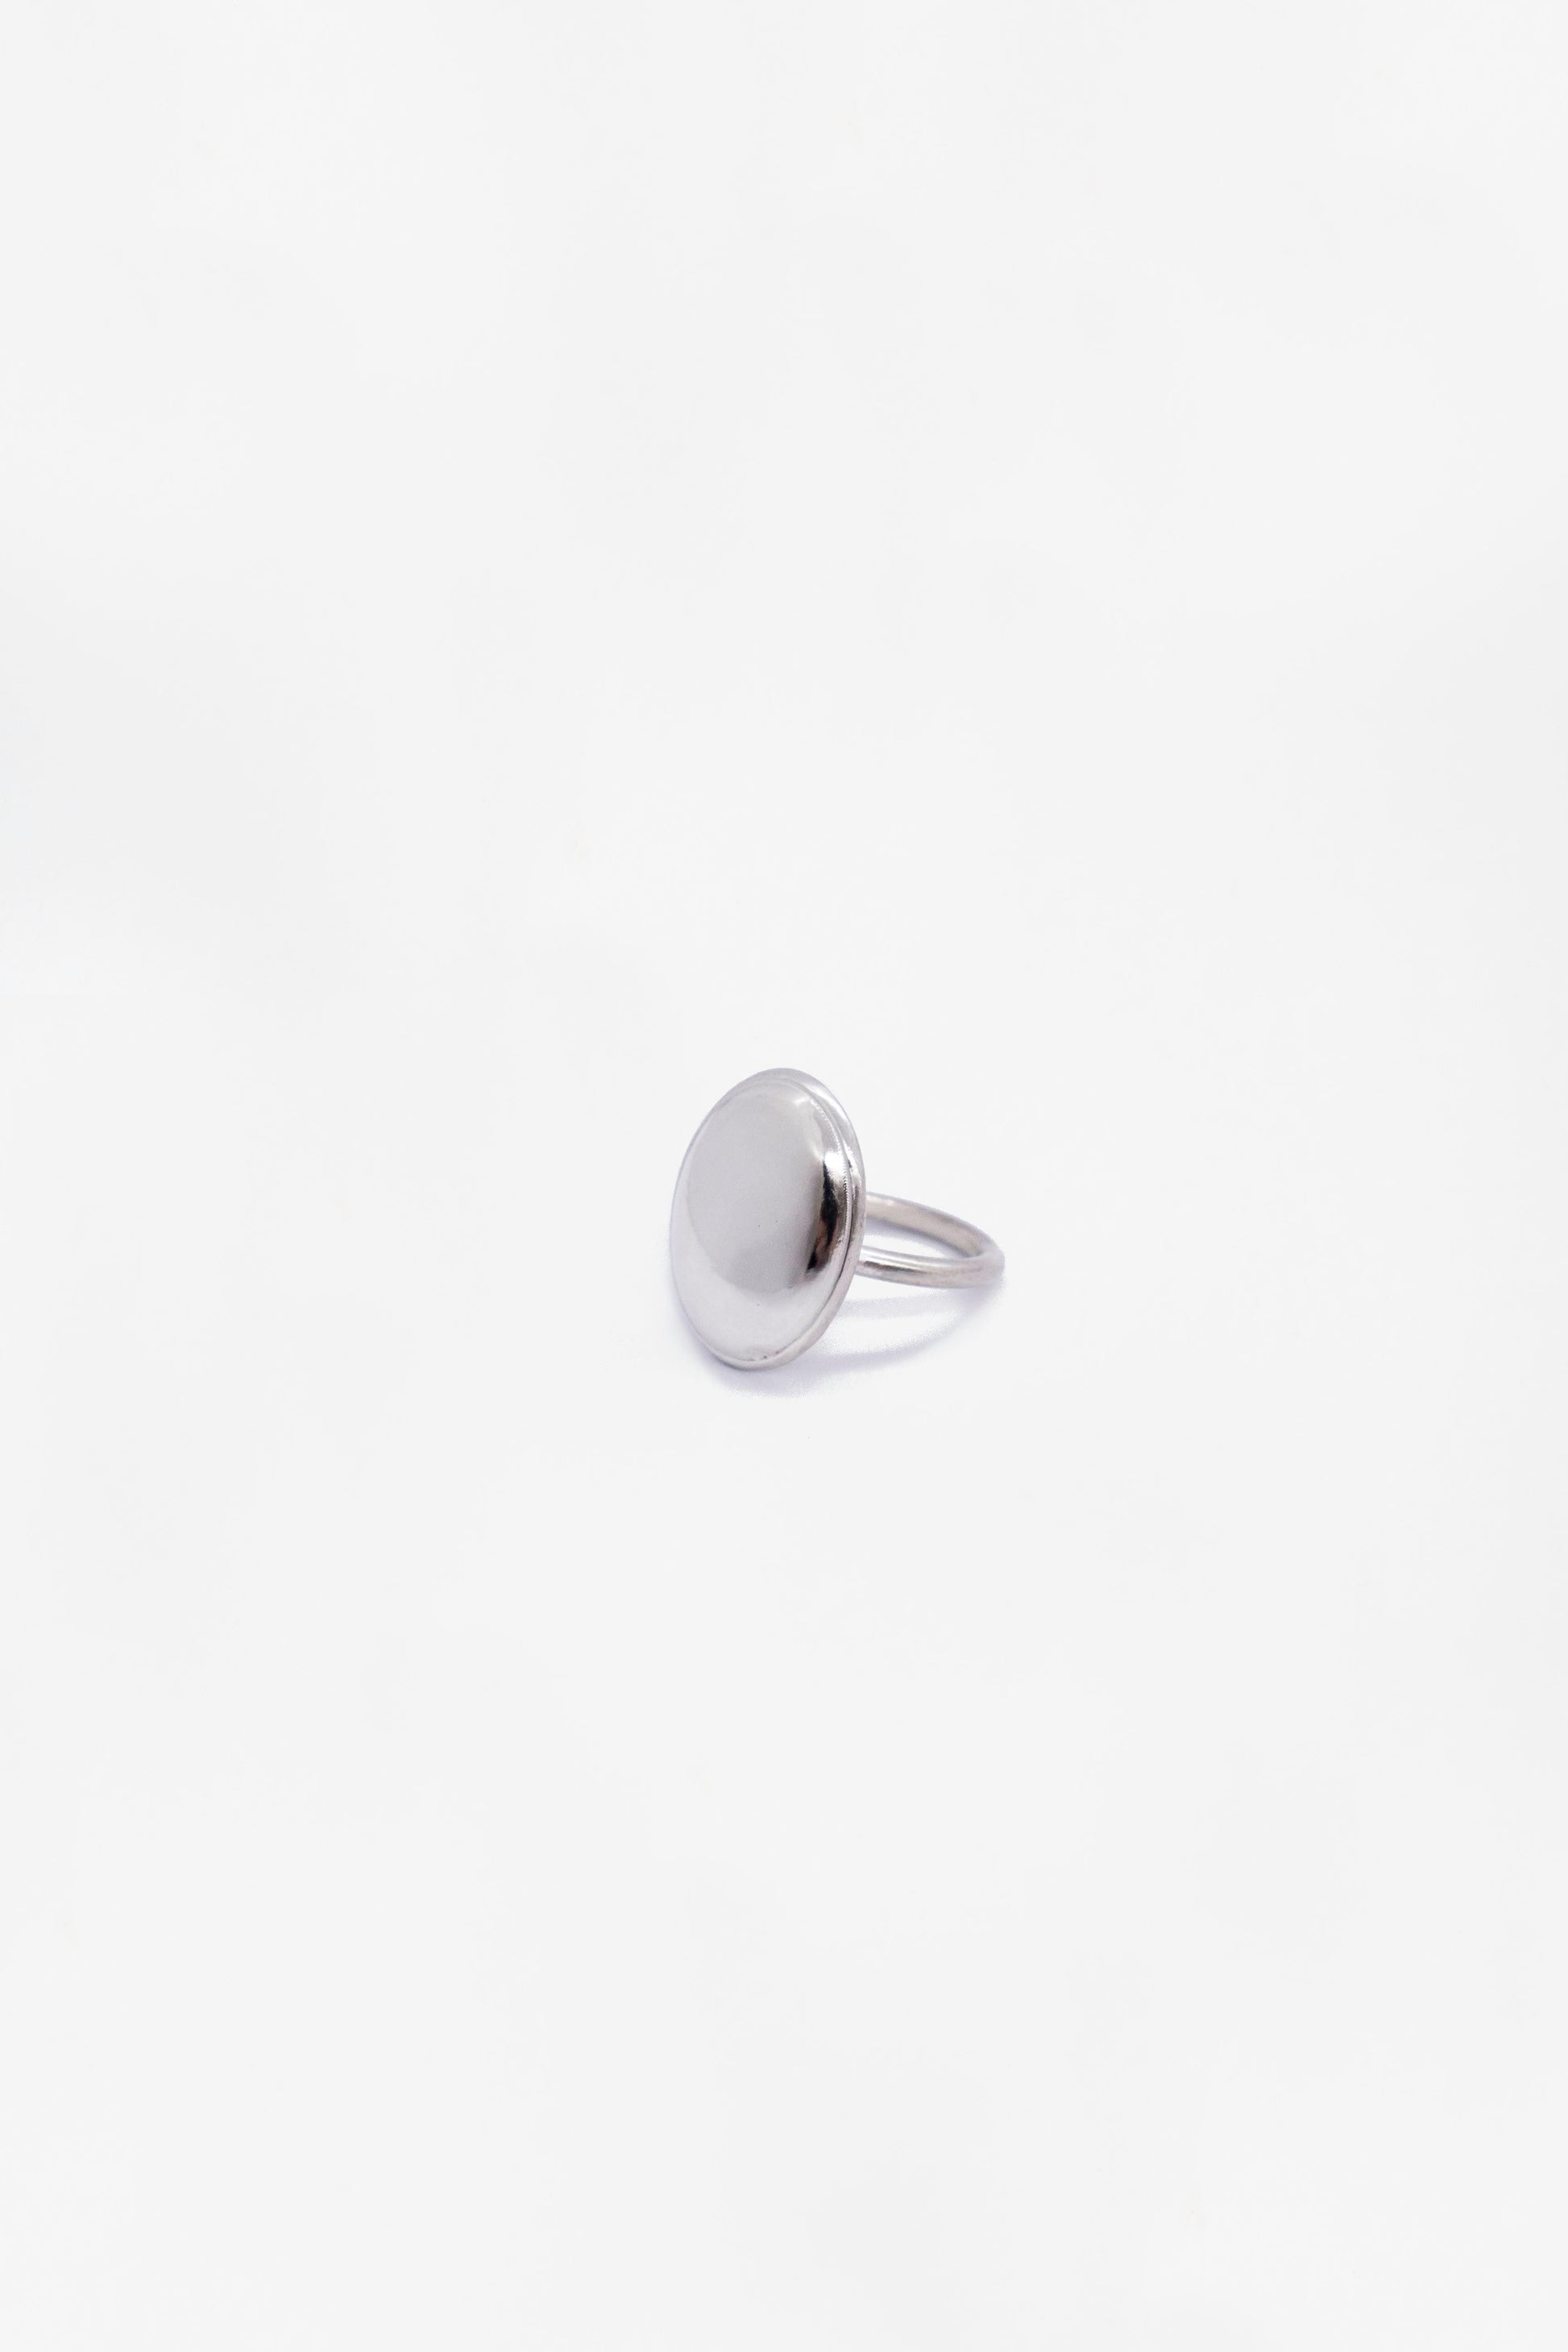 BEQUEST RING - Cong Yu - {{Jewellery}}